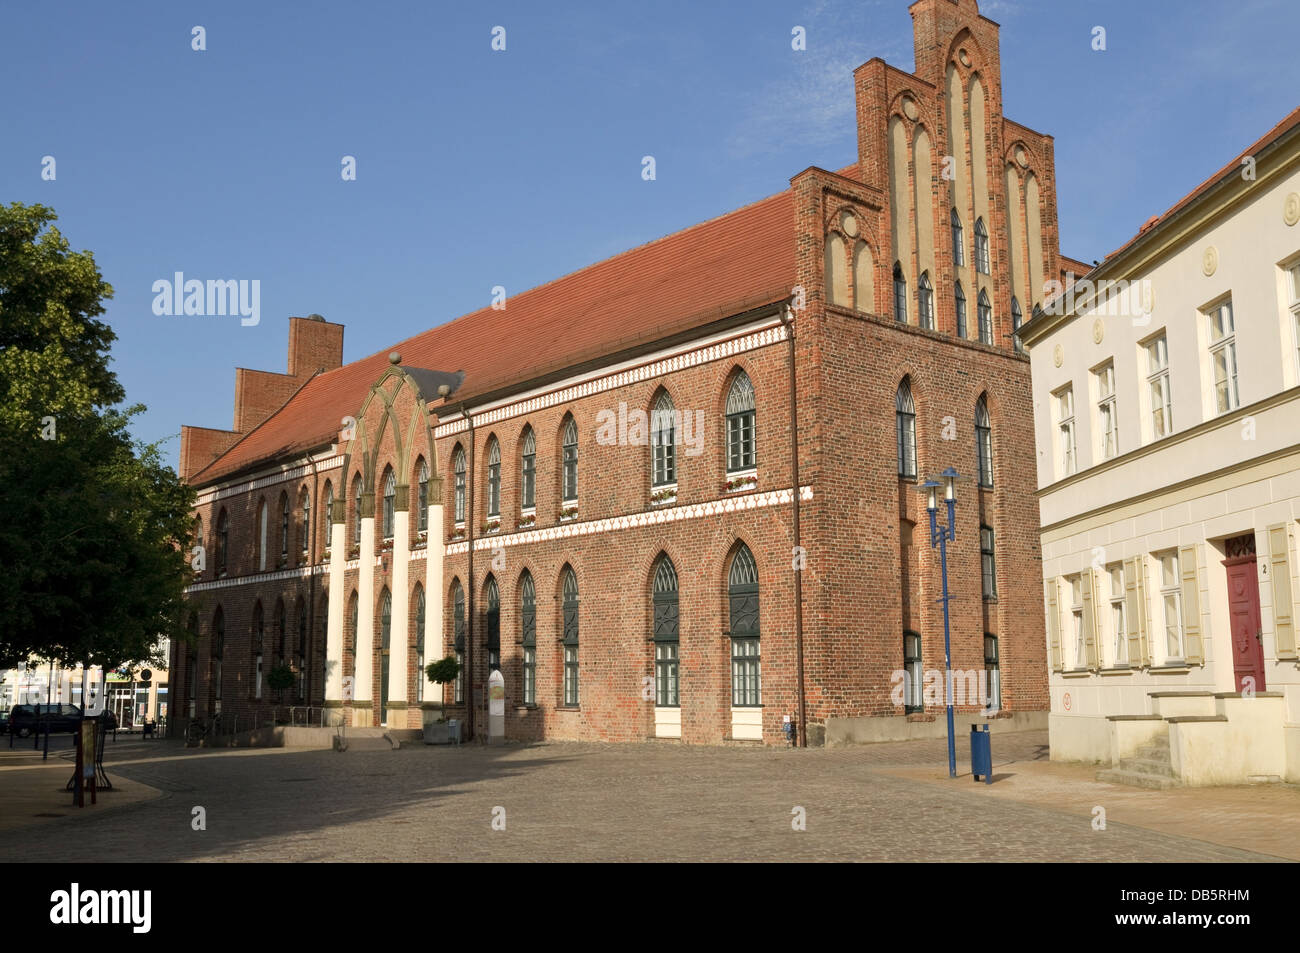 The Town Hall at Parchim, Mecklenburg Vorpommern, Germany. Stock Photo